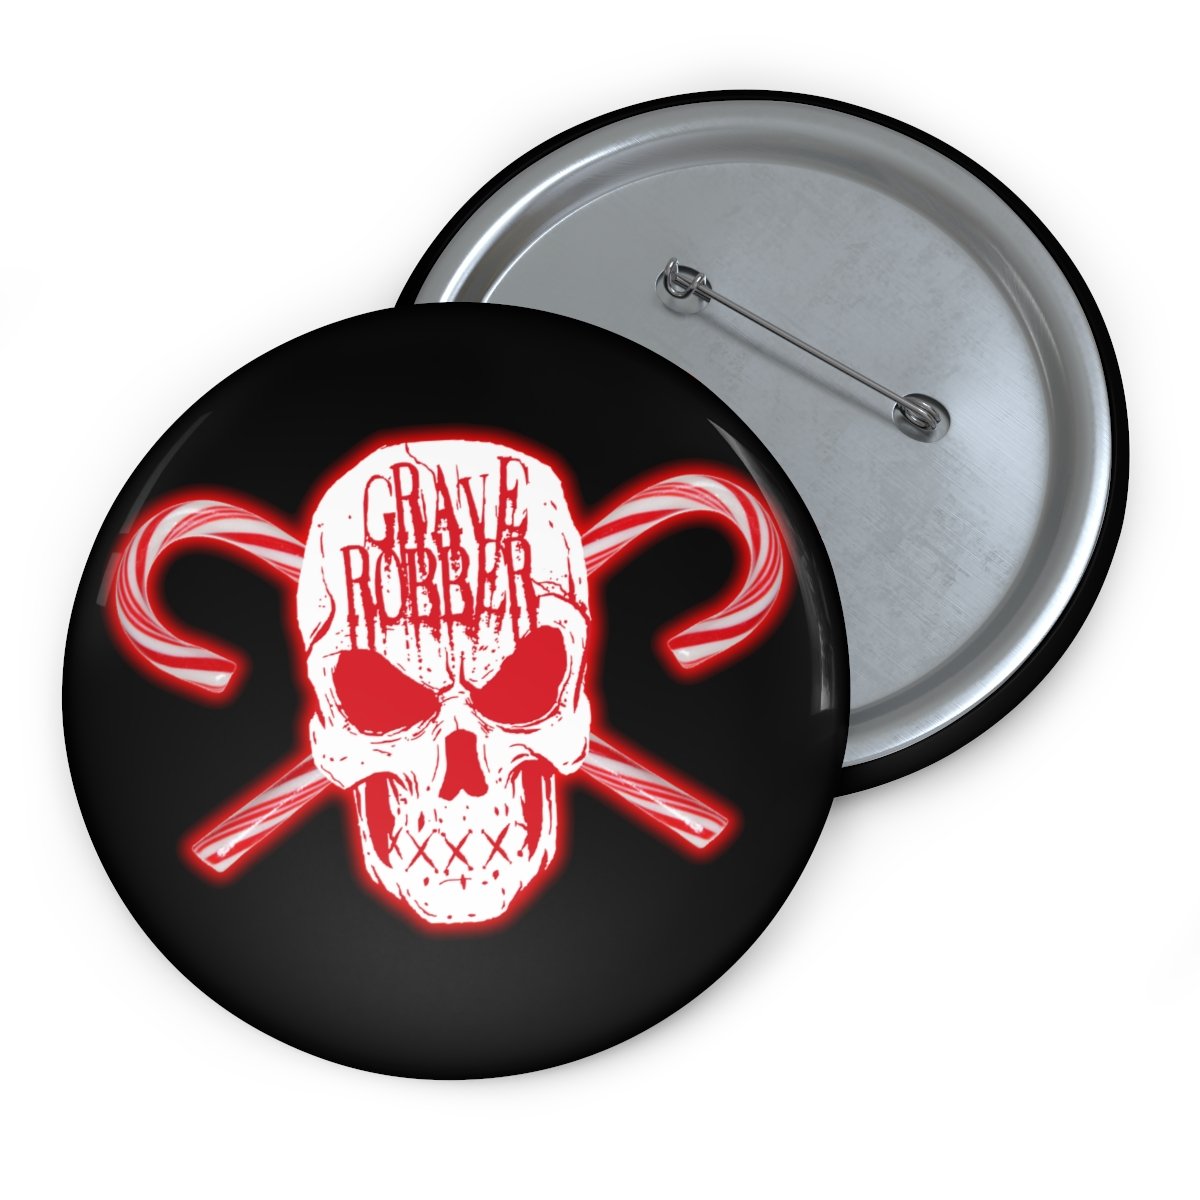 Grave Robber Skull and Crosscanes Pin Buttons